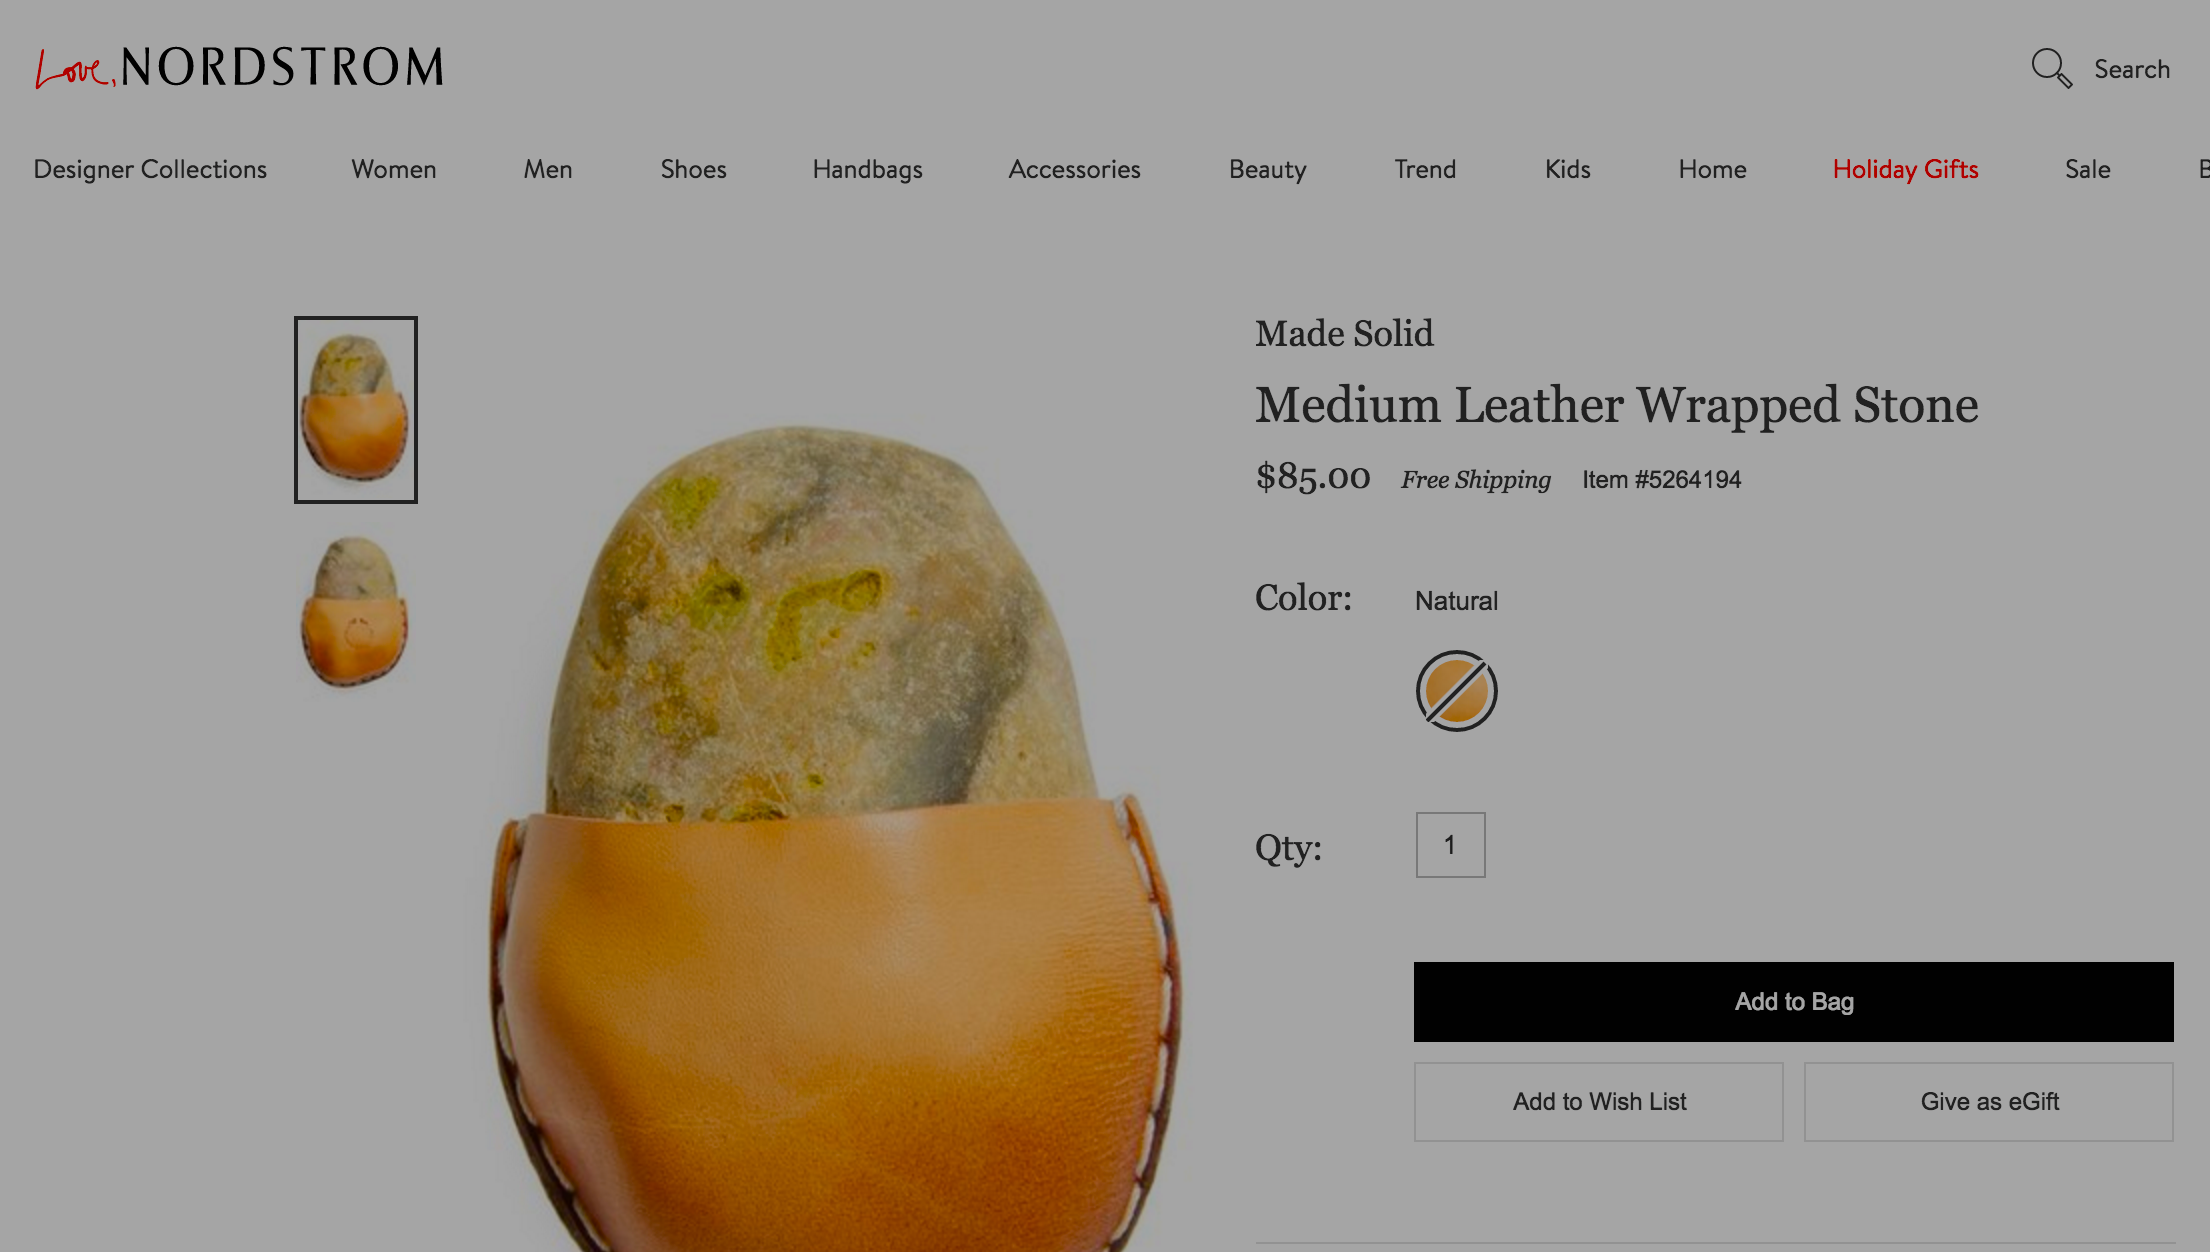 Nordstrom’s $85 “Leather Wrapped Stone” Makes Us Wonder: Can You Tell Real Gifts From Fakes?